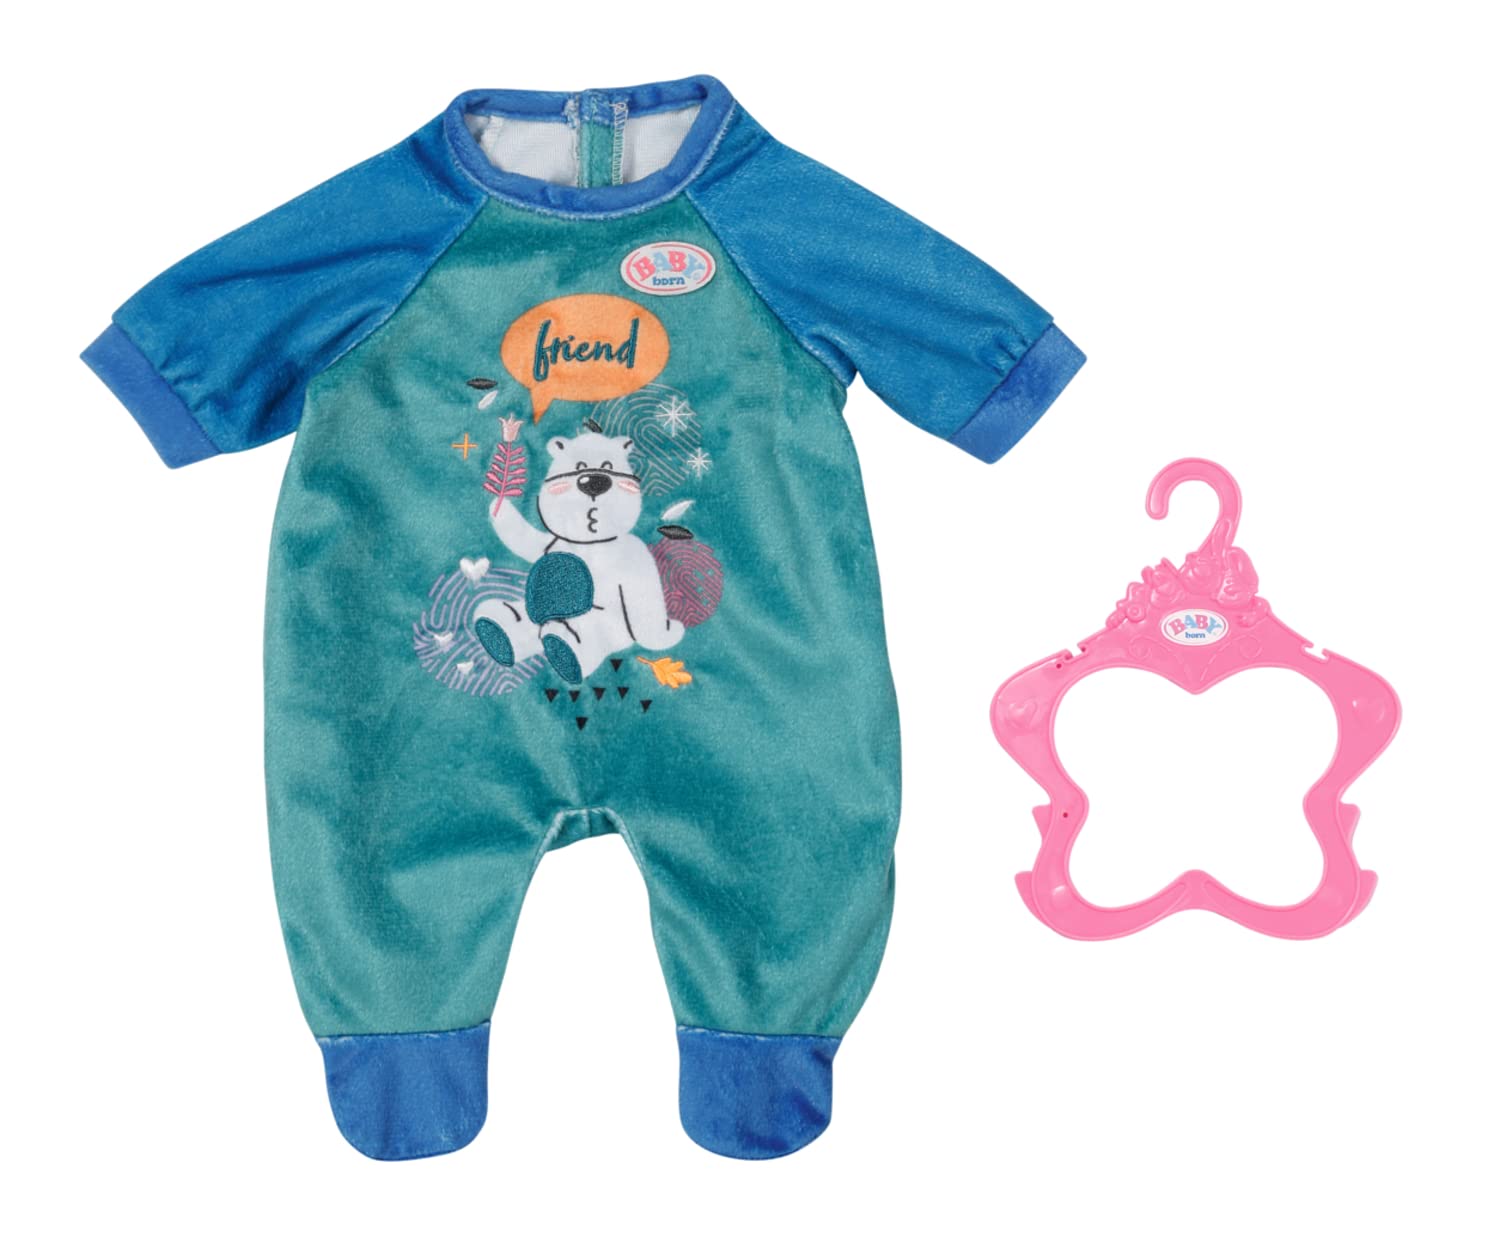 BABY born 833629 Romper Blue-Fits Dolls up to 43cm-Set Includes Hanger-Suitable for Children Aged 3+ years-833629